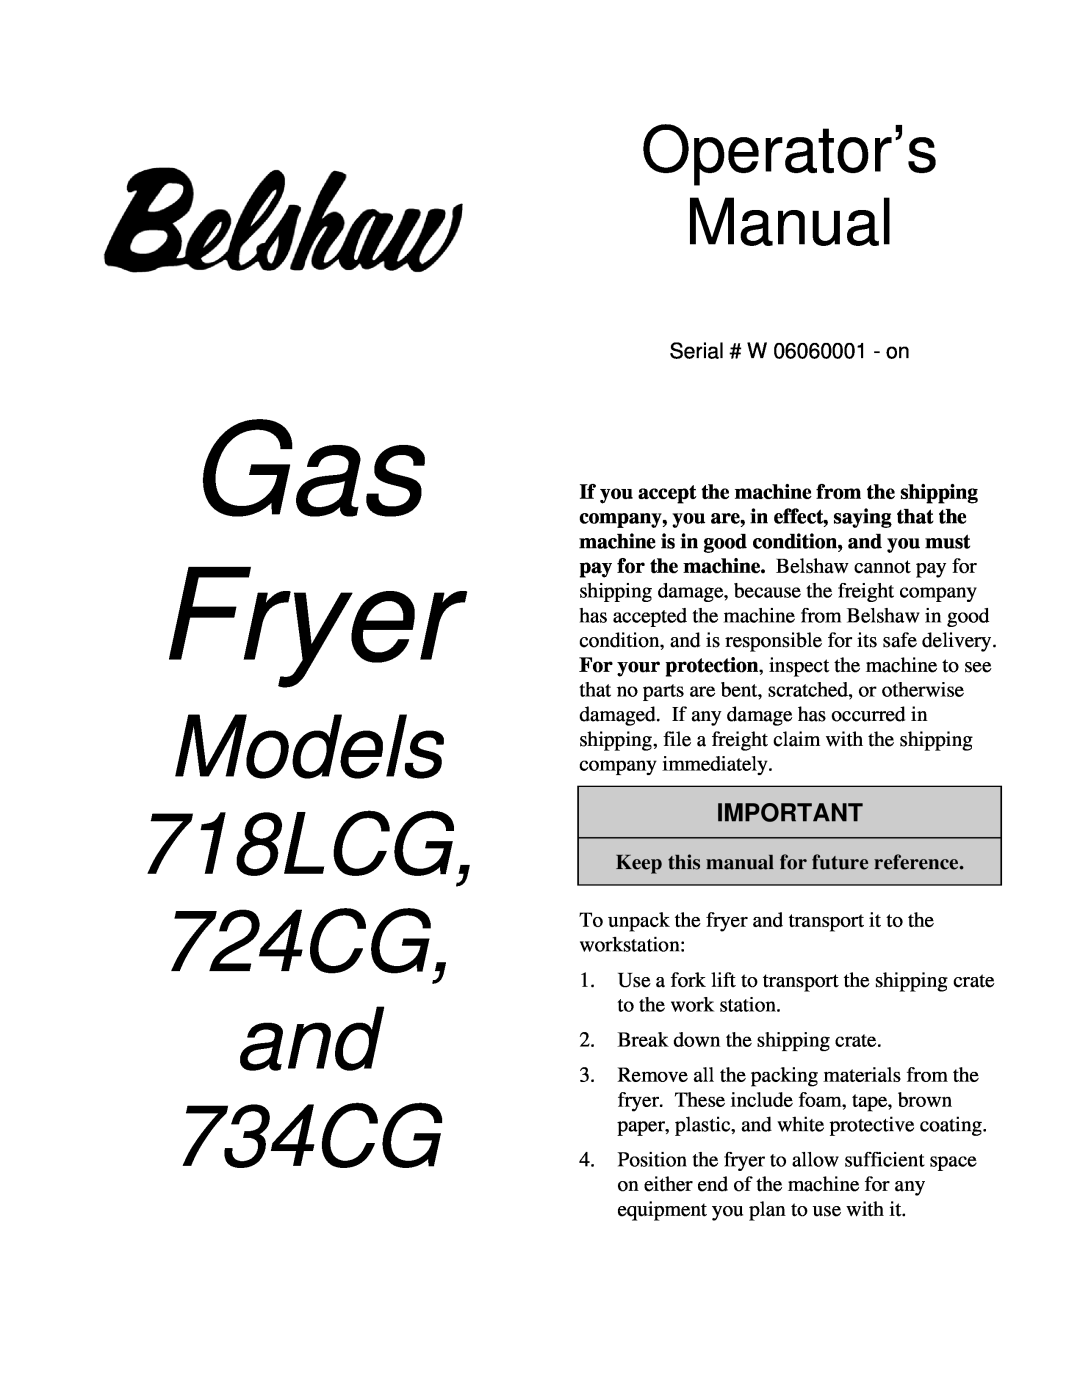 Belshaw Brothers manual Operator’s Manual, Gas Fryer, Models 718LCG 724CG and 734CG 